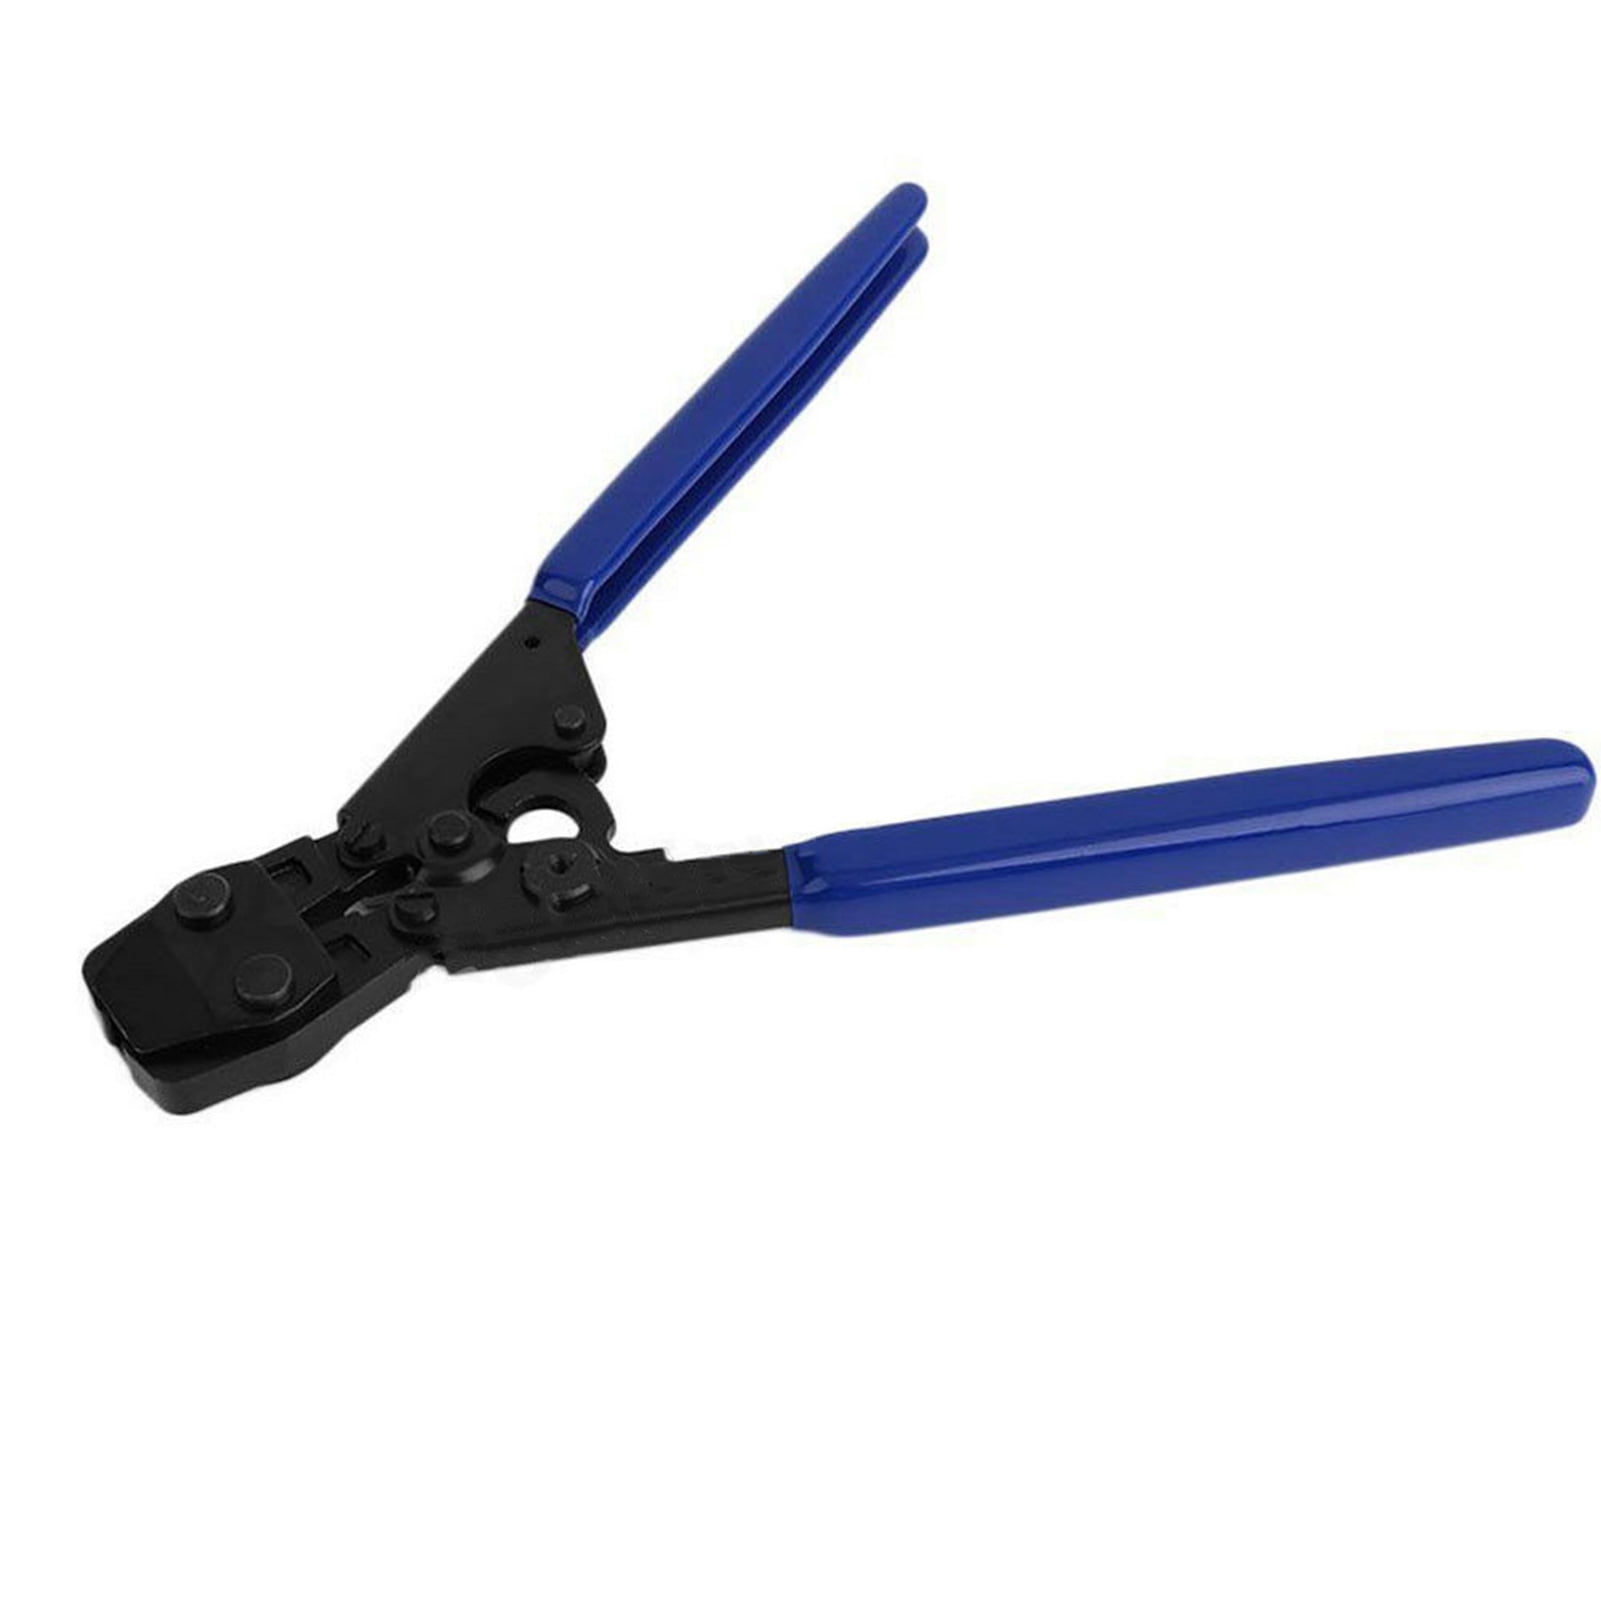 NEW PEX Cinch Crimper Crimping Tool for SS Hose Clamps Sizes from 3/8" to 1" 